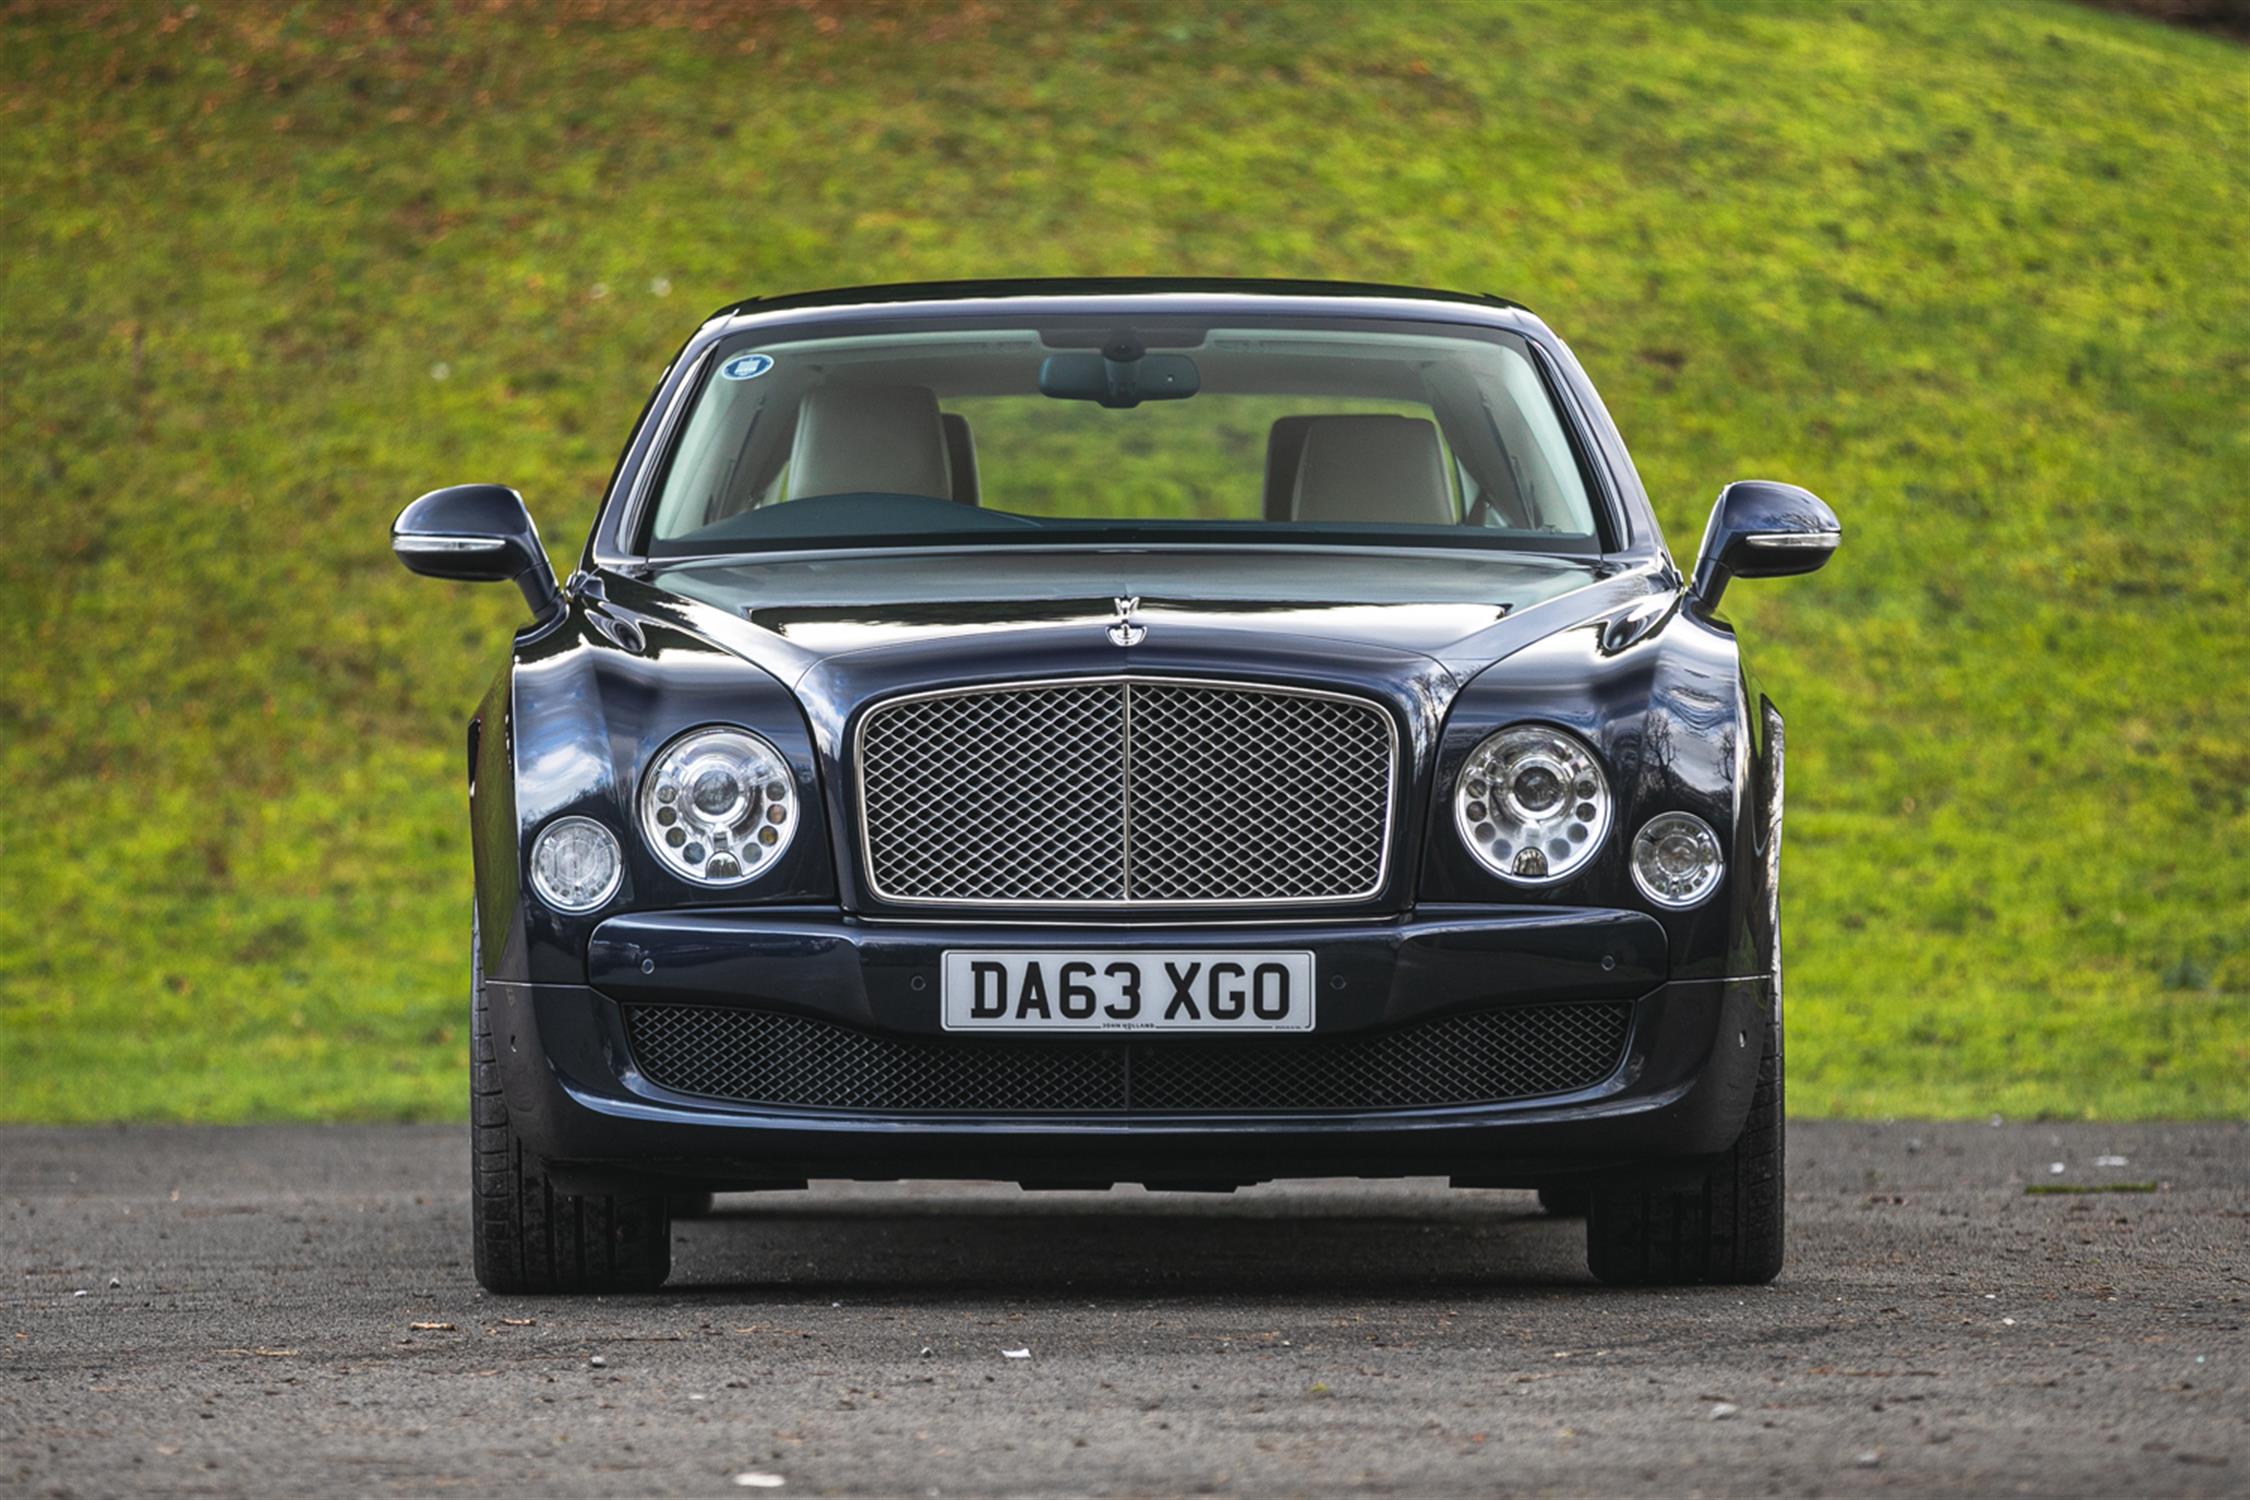 2013 Bentley Mulsanne - Former Bentley Special Ops with Royal Household Duties - Image 6 of 10